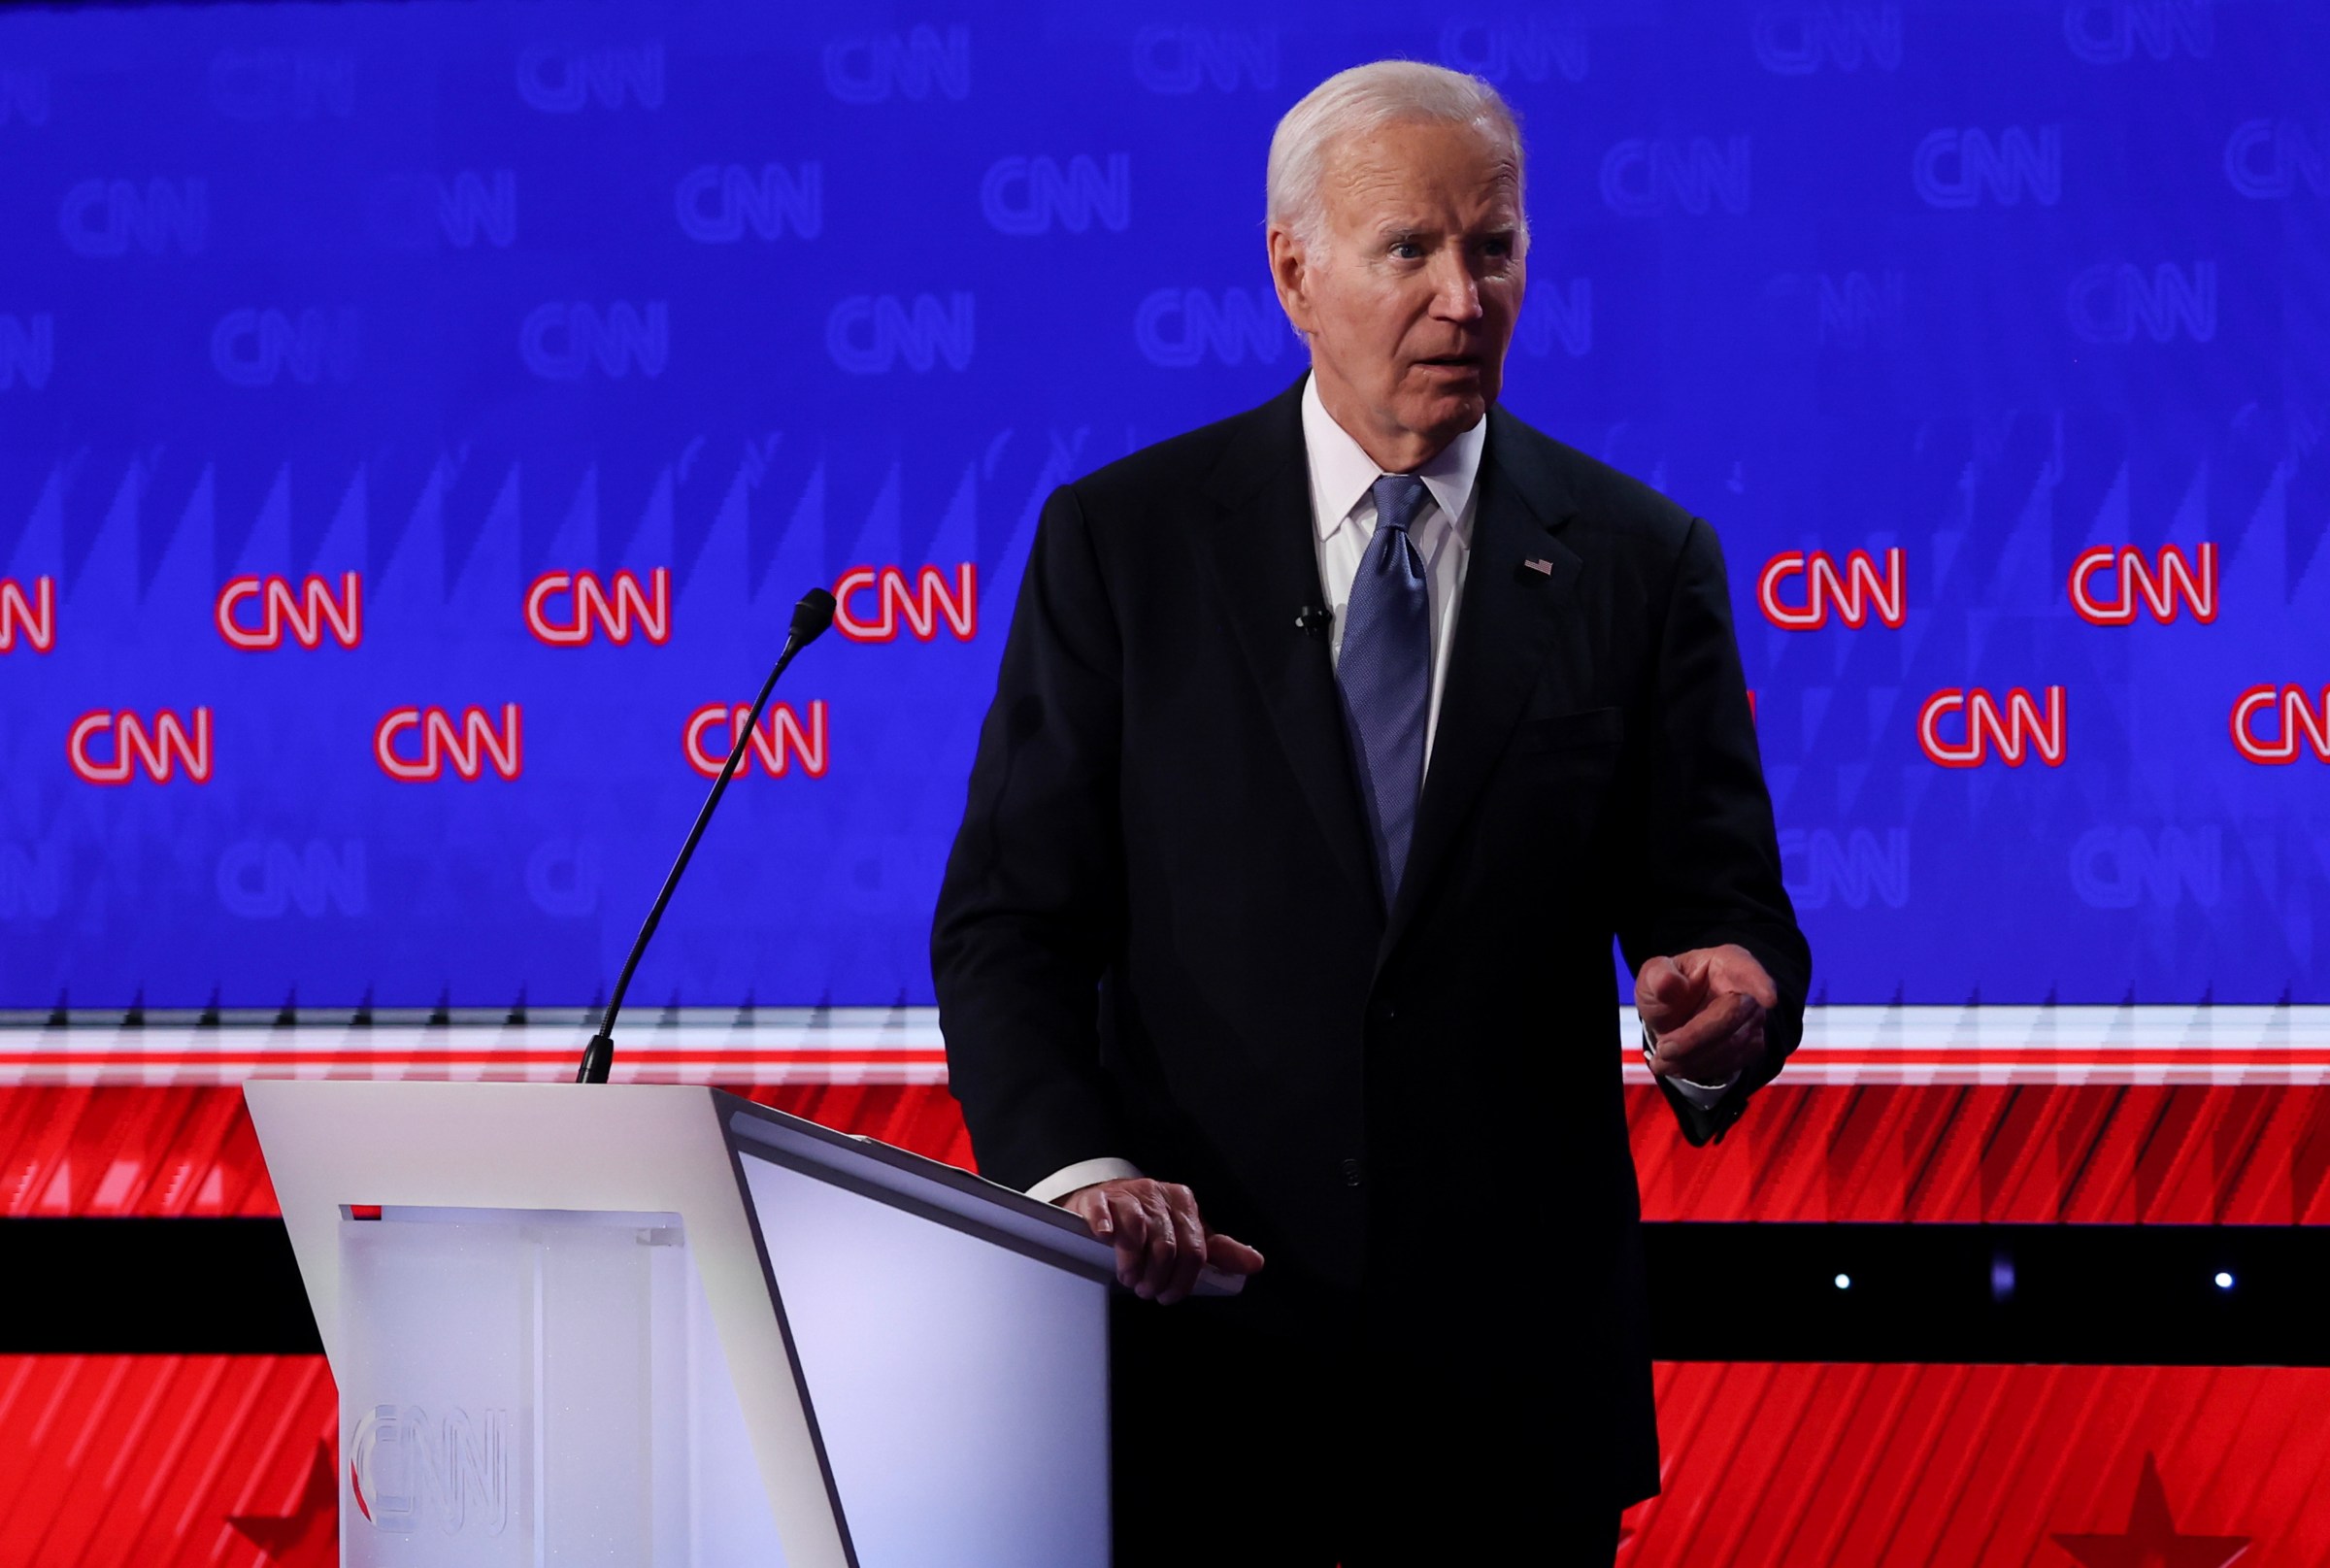 Joe Biden should save his legacy by ending his candidacy